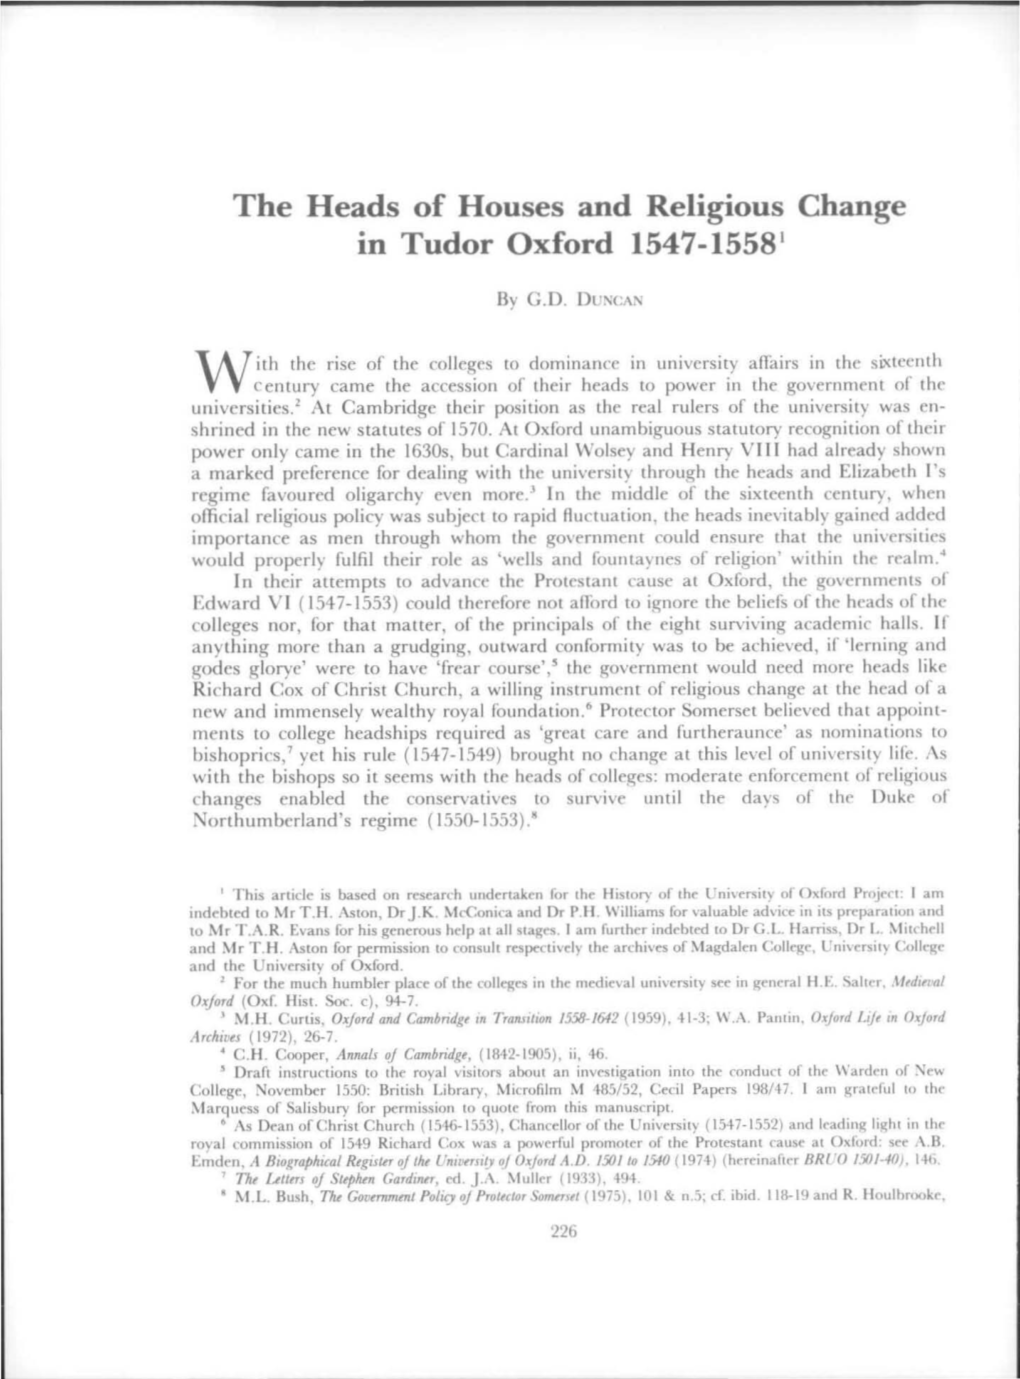 The Heads of Houses and Religious Change in Tudor Oxford 1547-15581